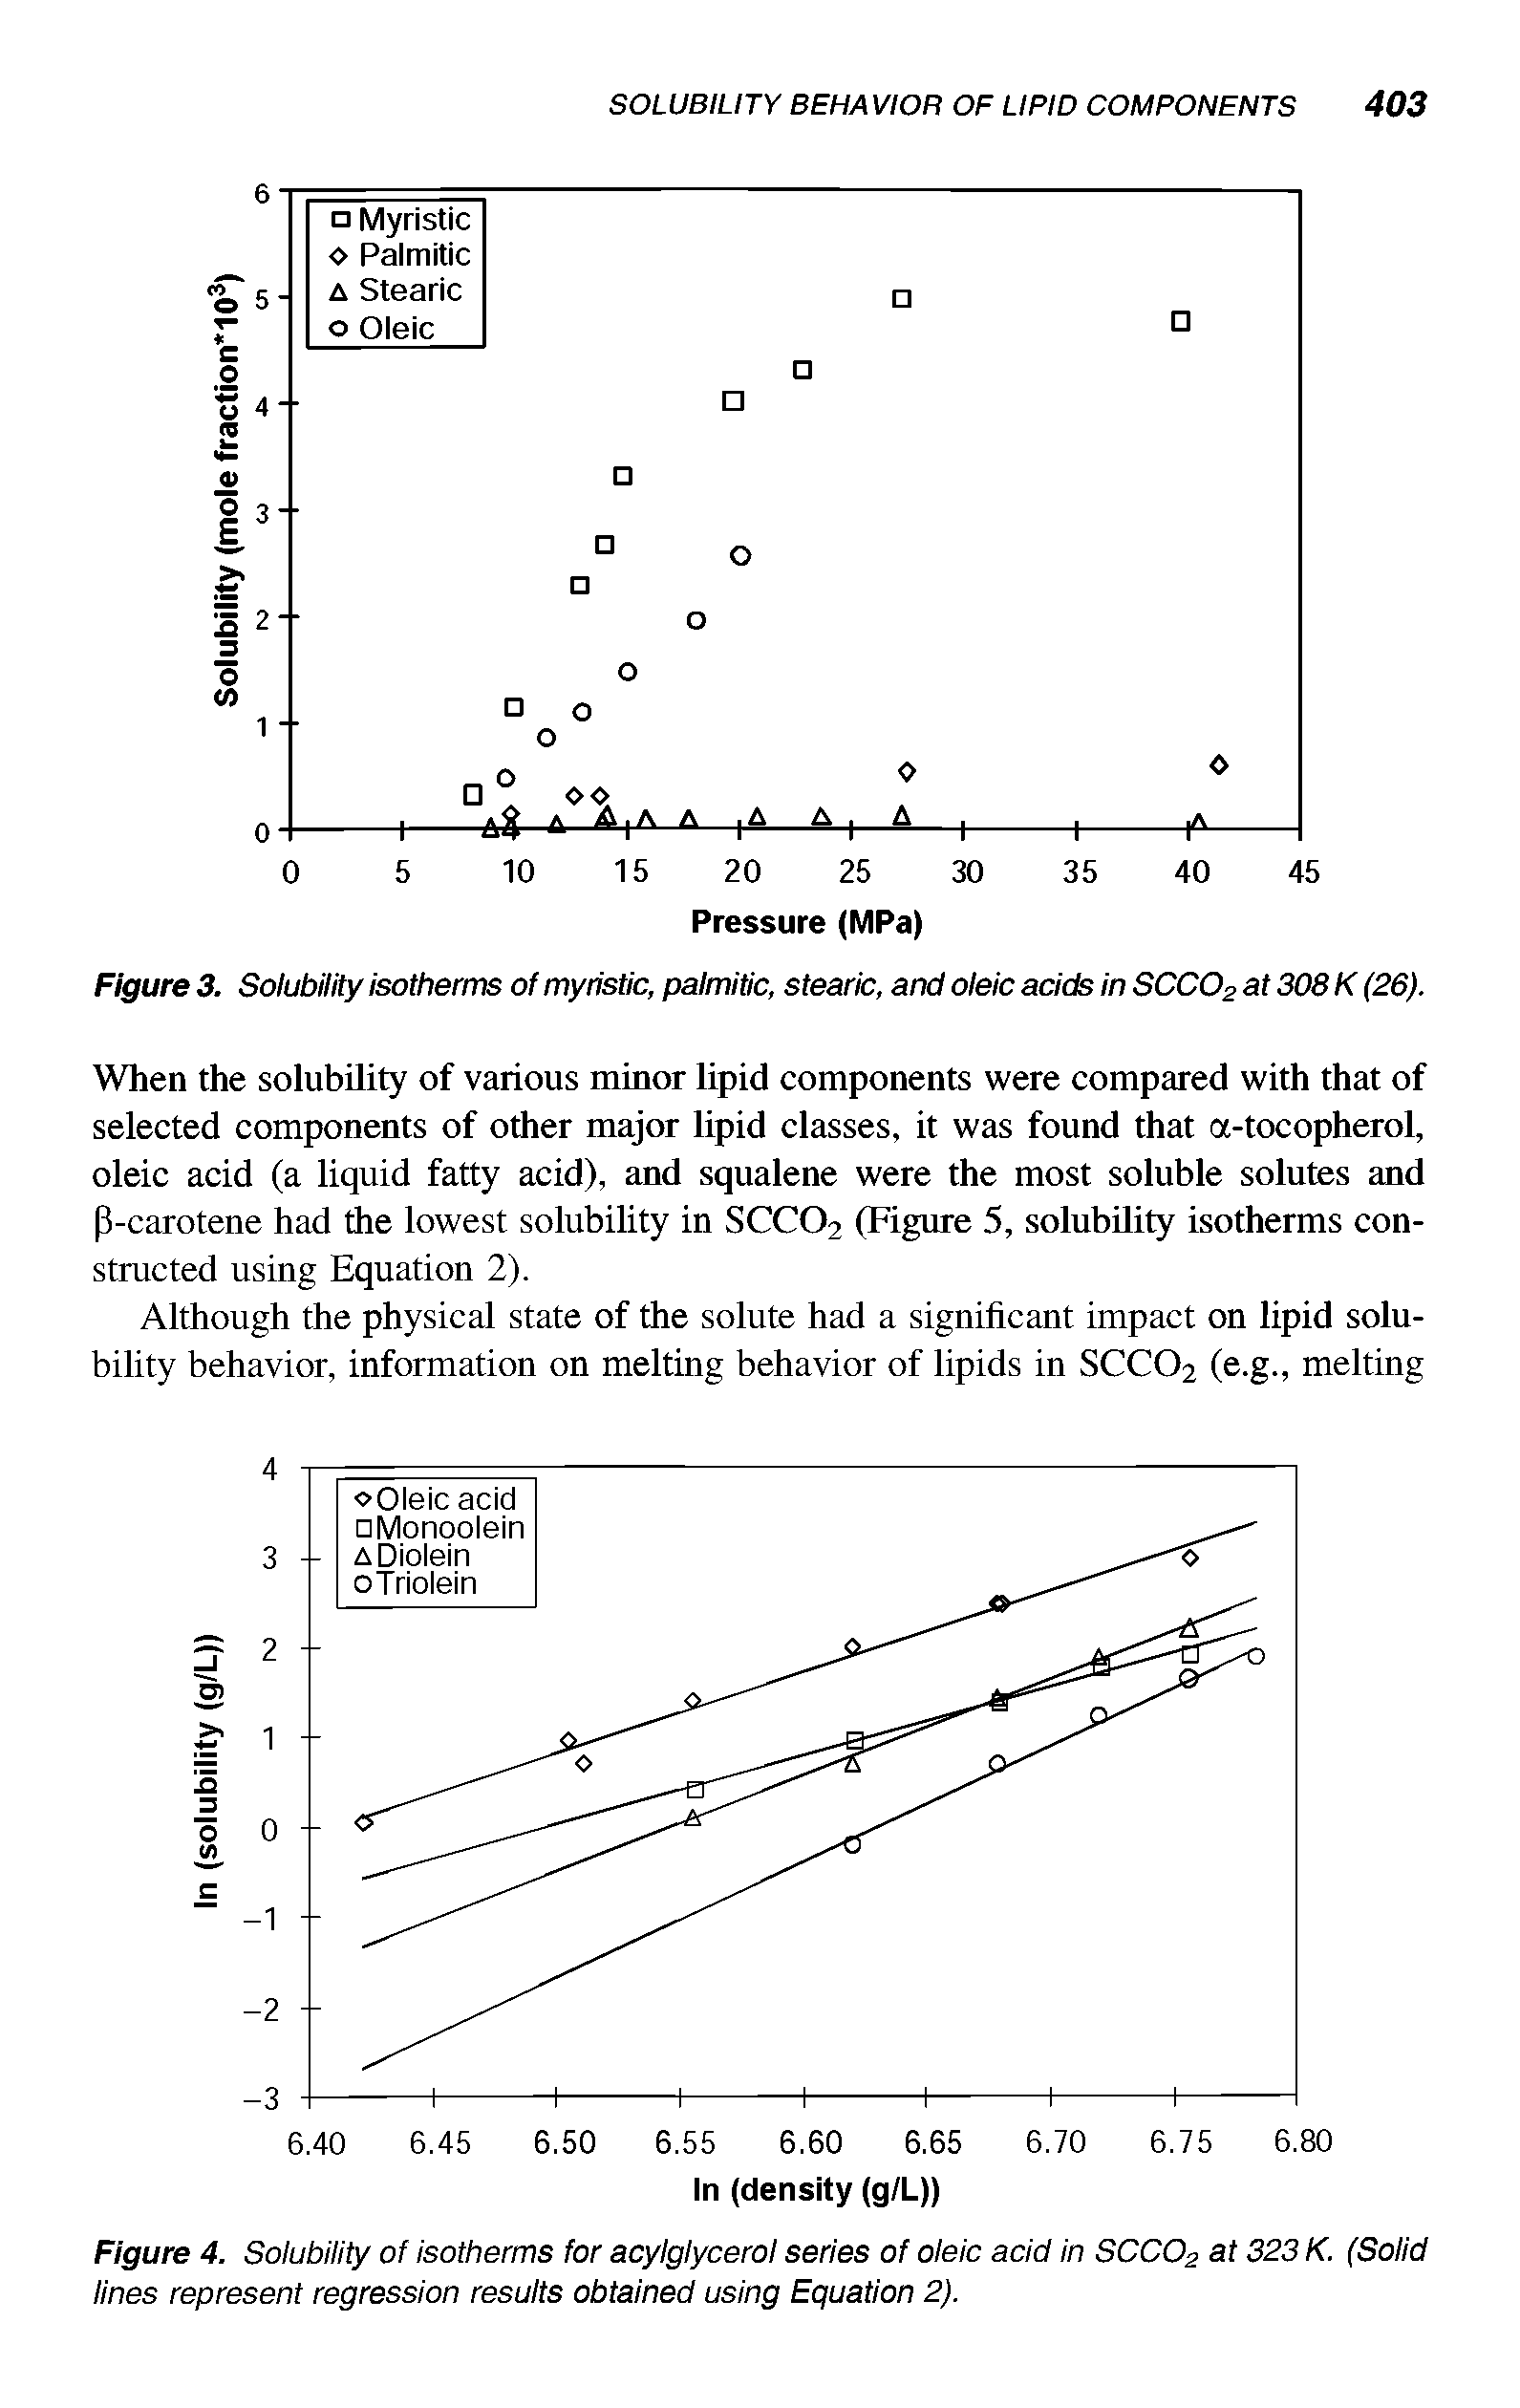 Figure 3. Solubility isotherms of myristic, palmitic, stearic, and oieic acids in SCCO2 at 308 K (26).